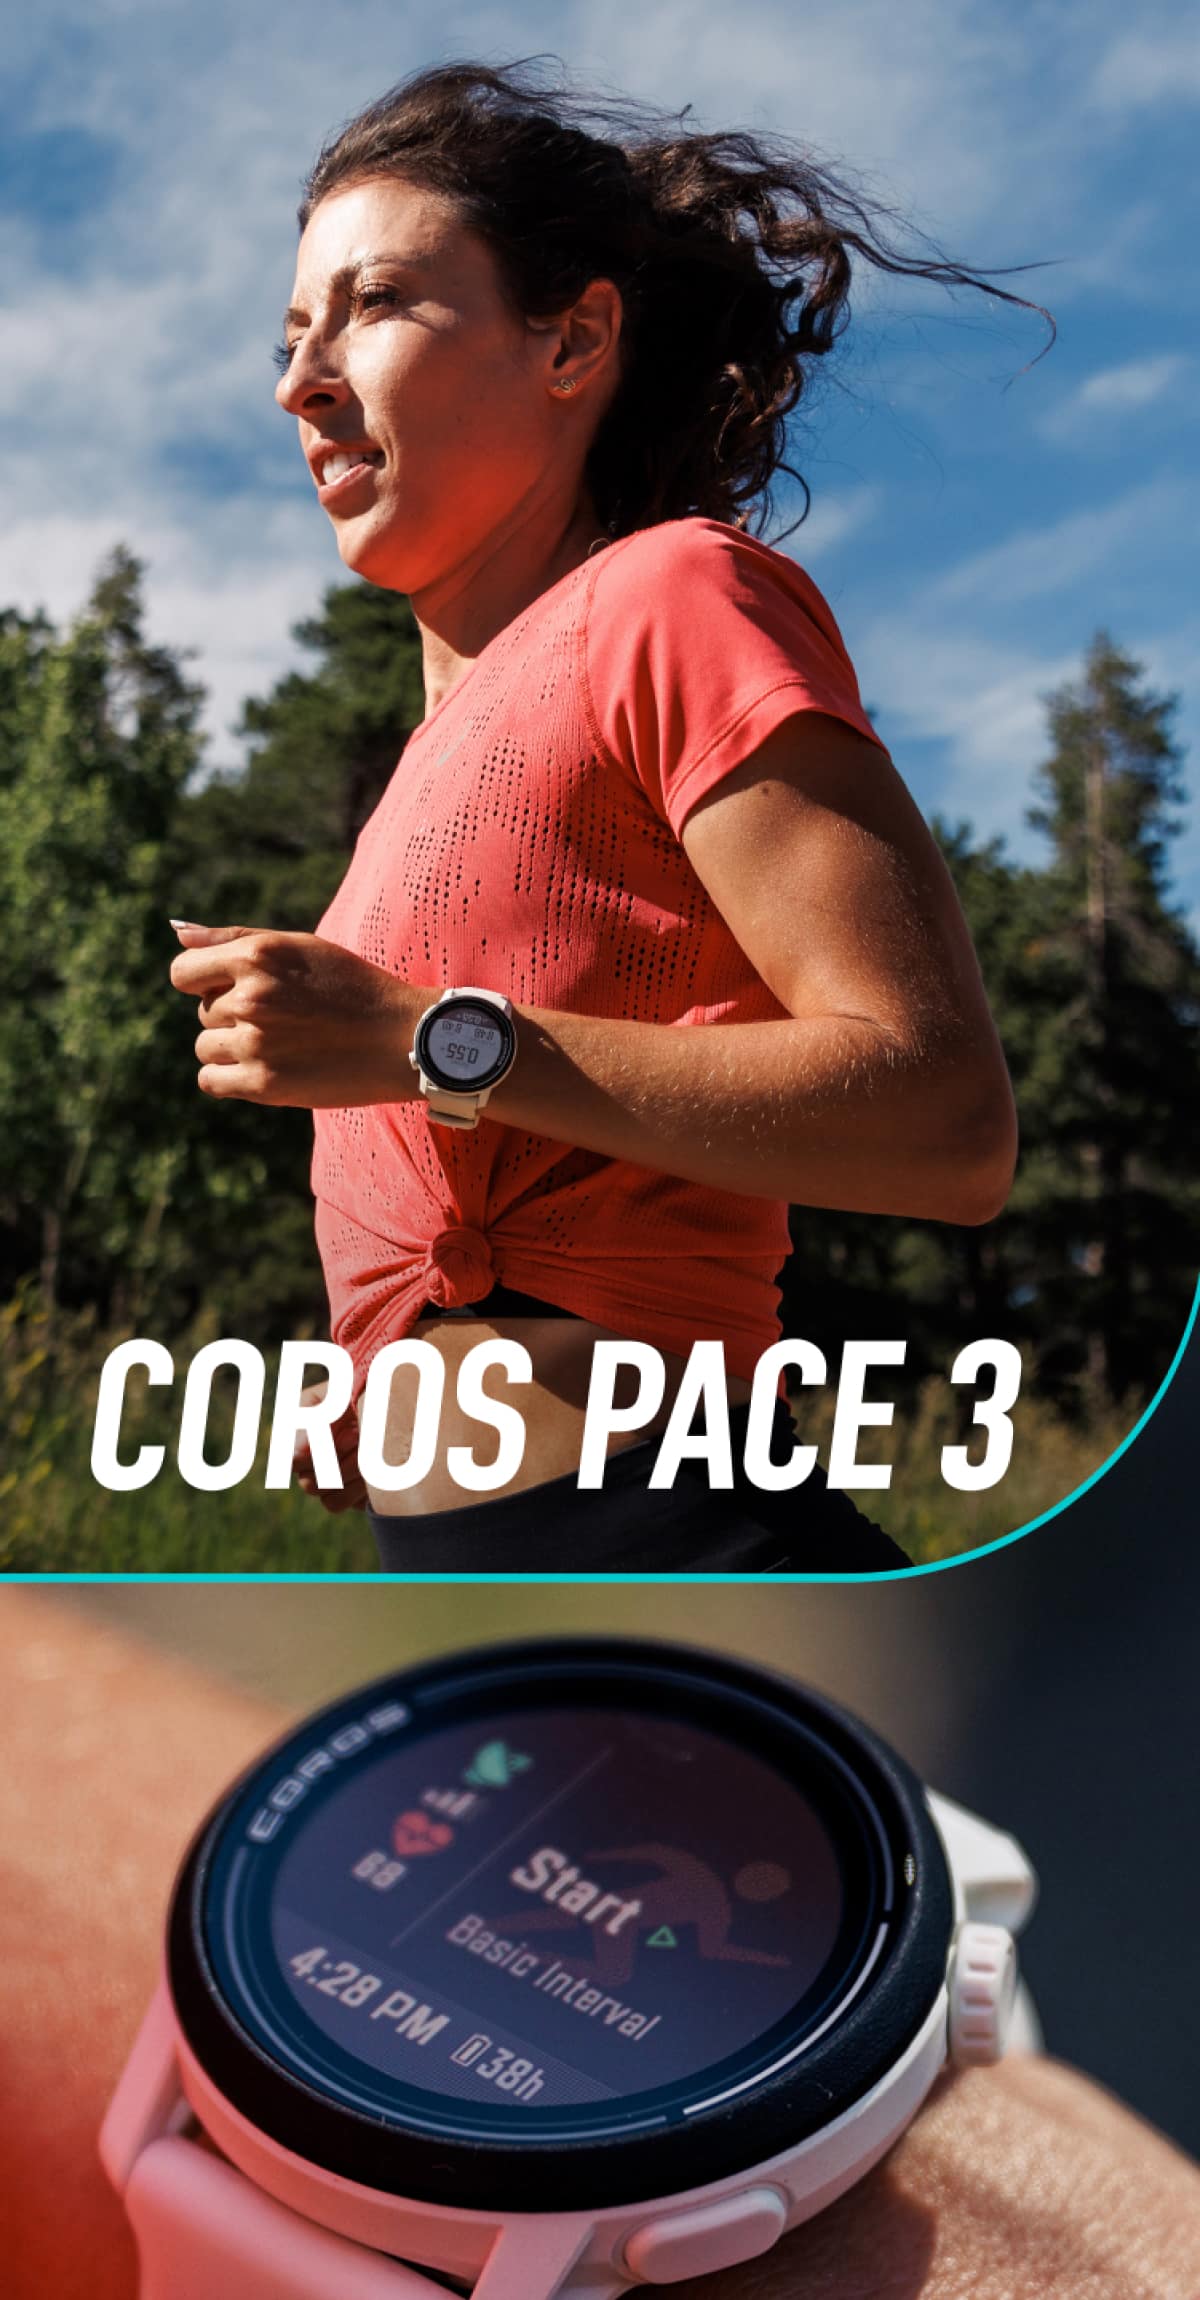 Pace 3 finally came in : r/Coros